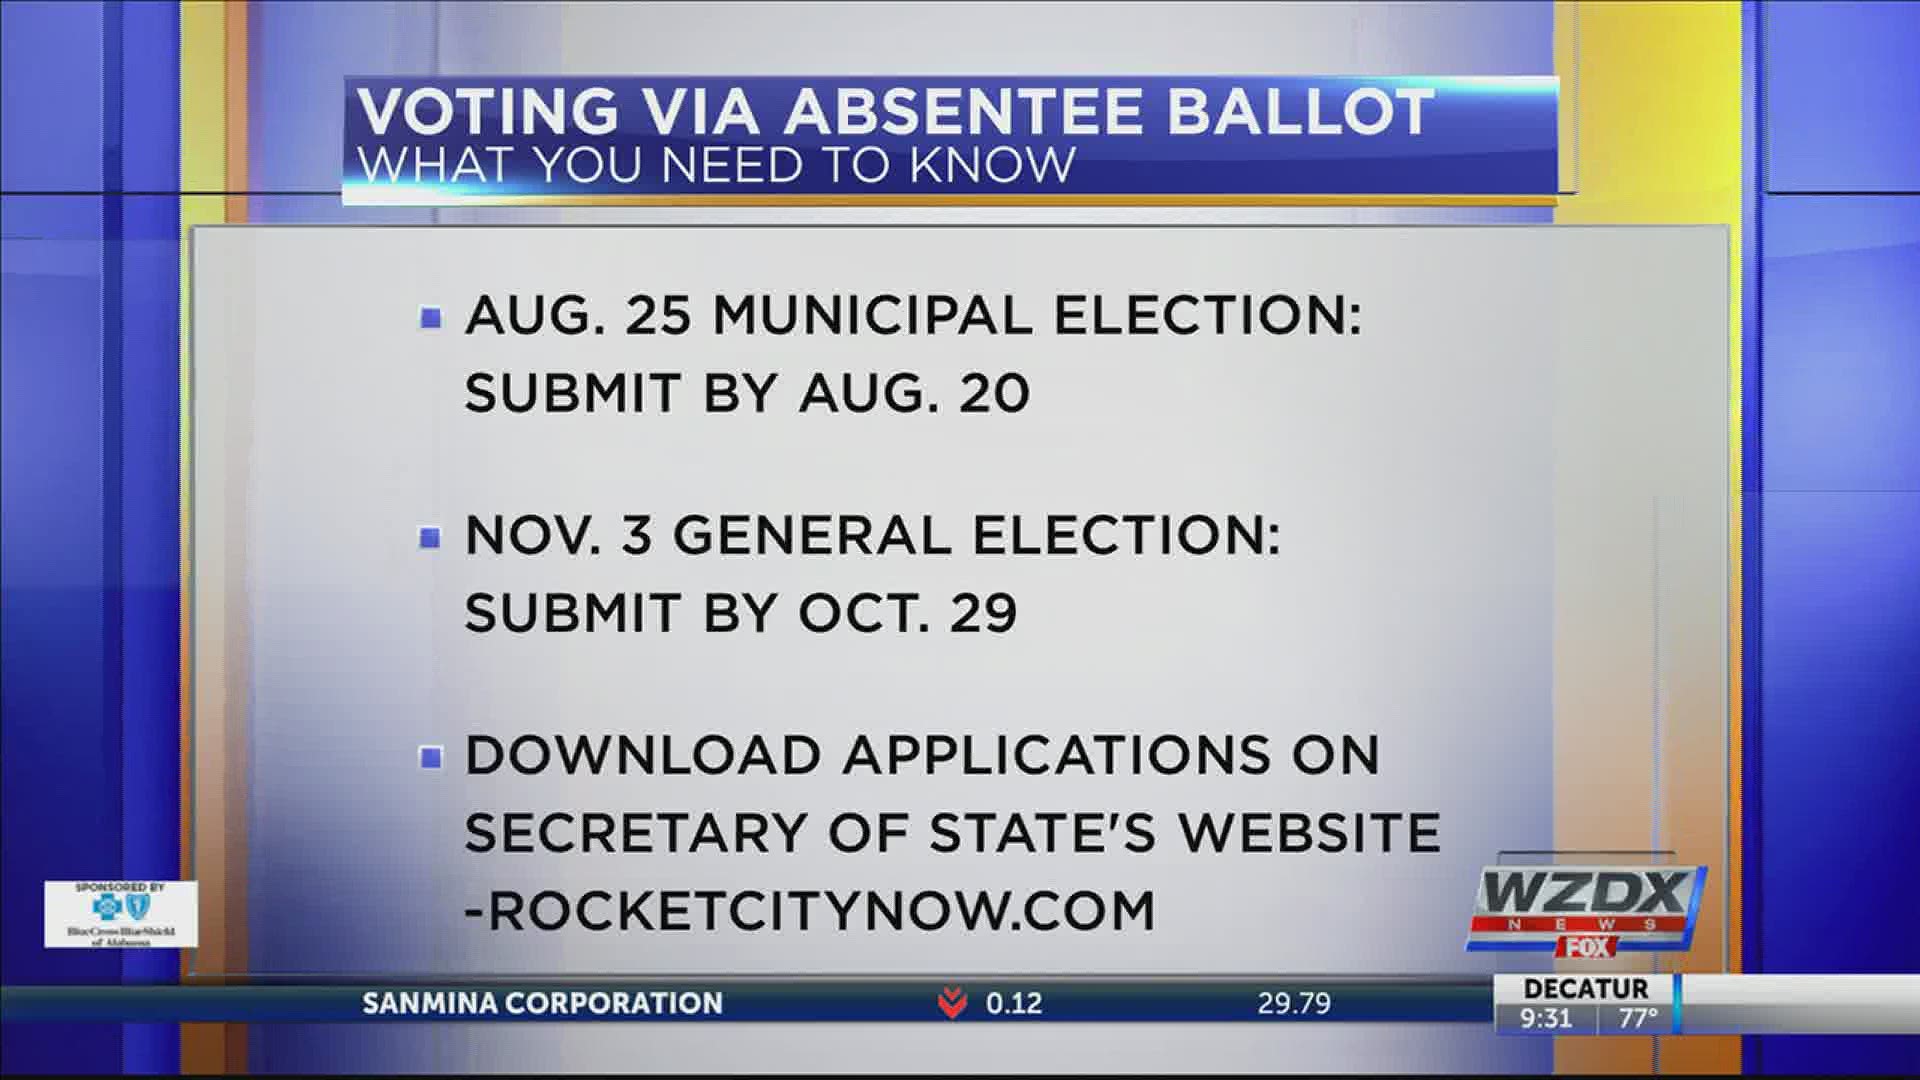 If you're concerned about spreading or contracting COVID-19, Secretary of State John H. Merrill suggests you apply for an absentee ballot.